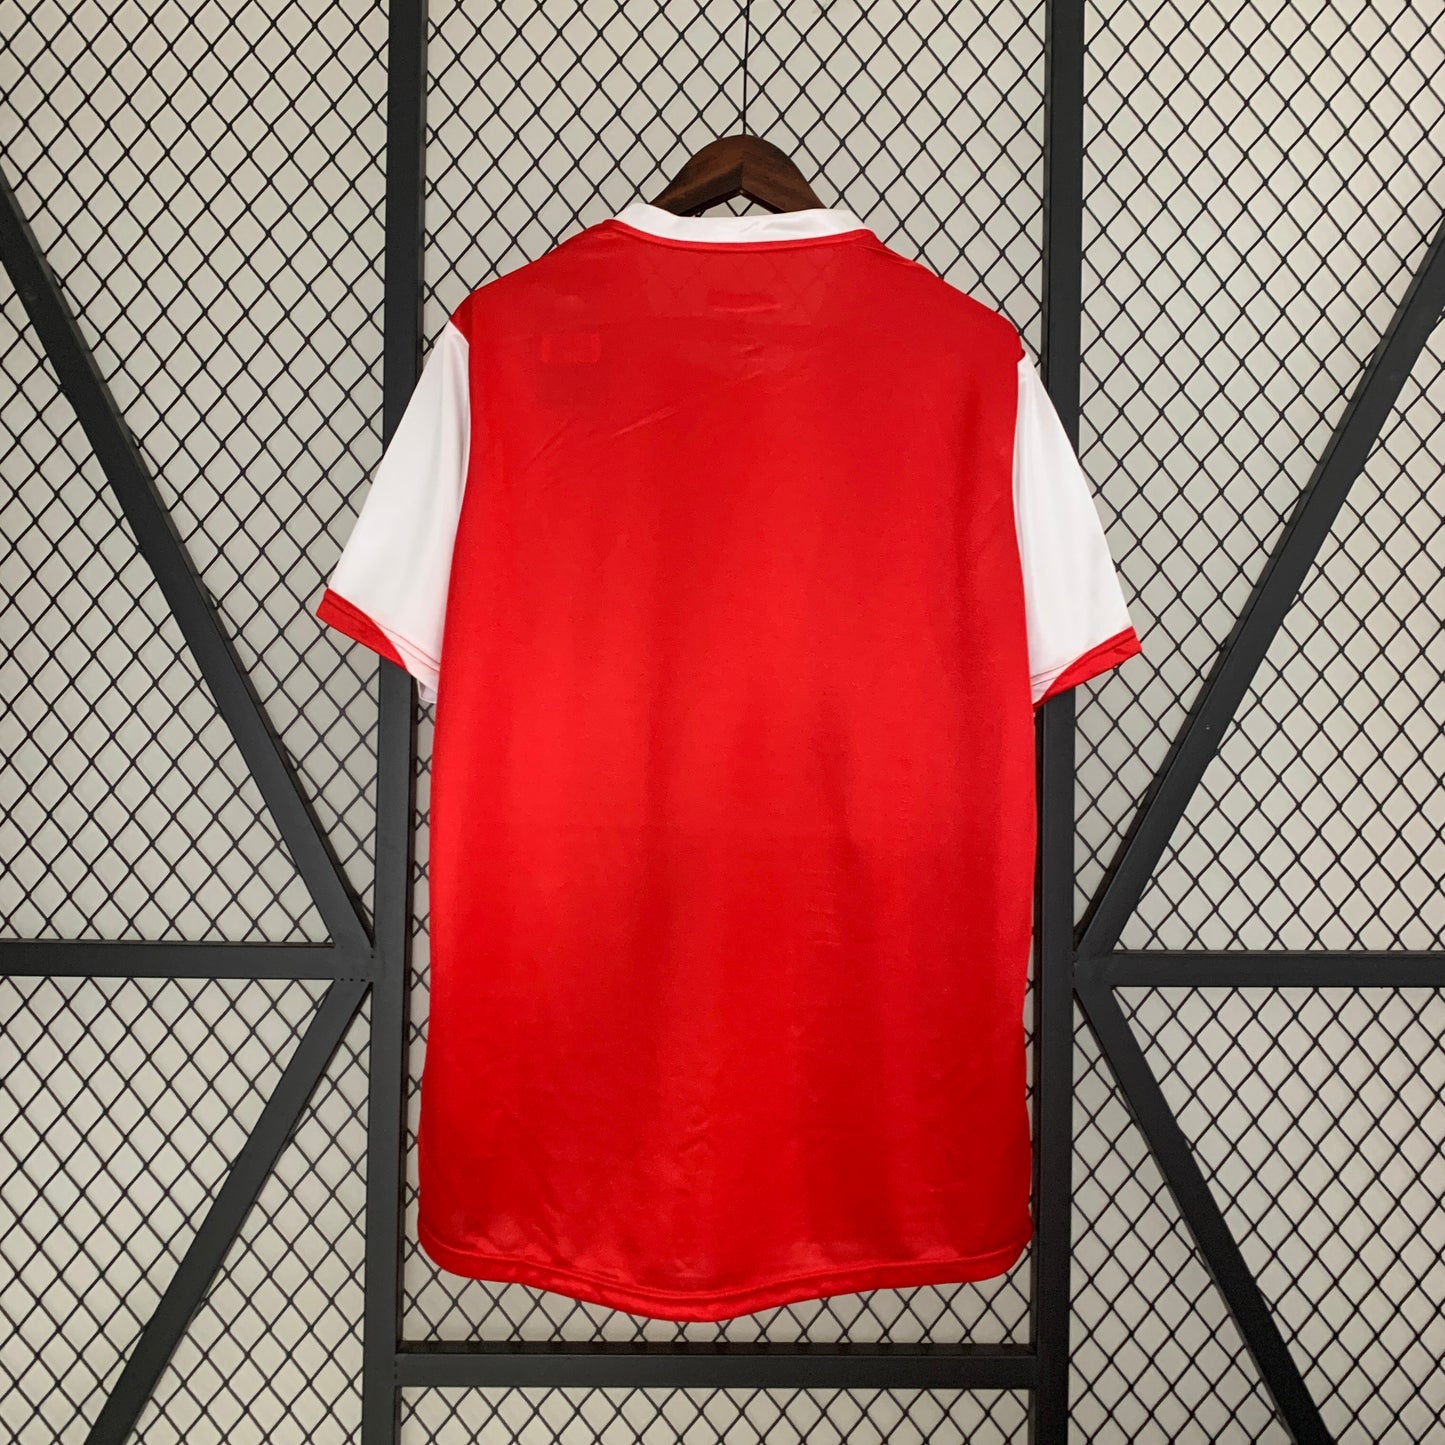 ARSENAL 2007 - 2008 HOME JERSEY